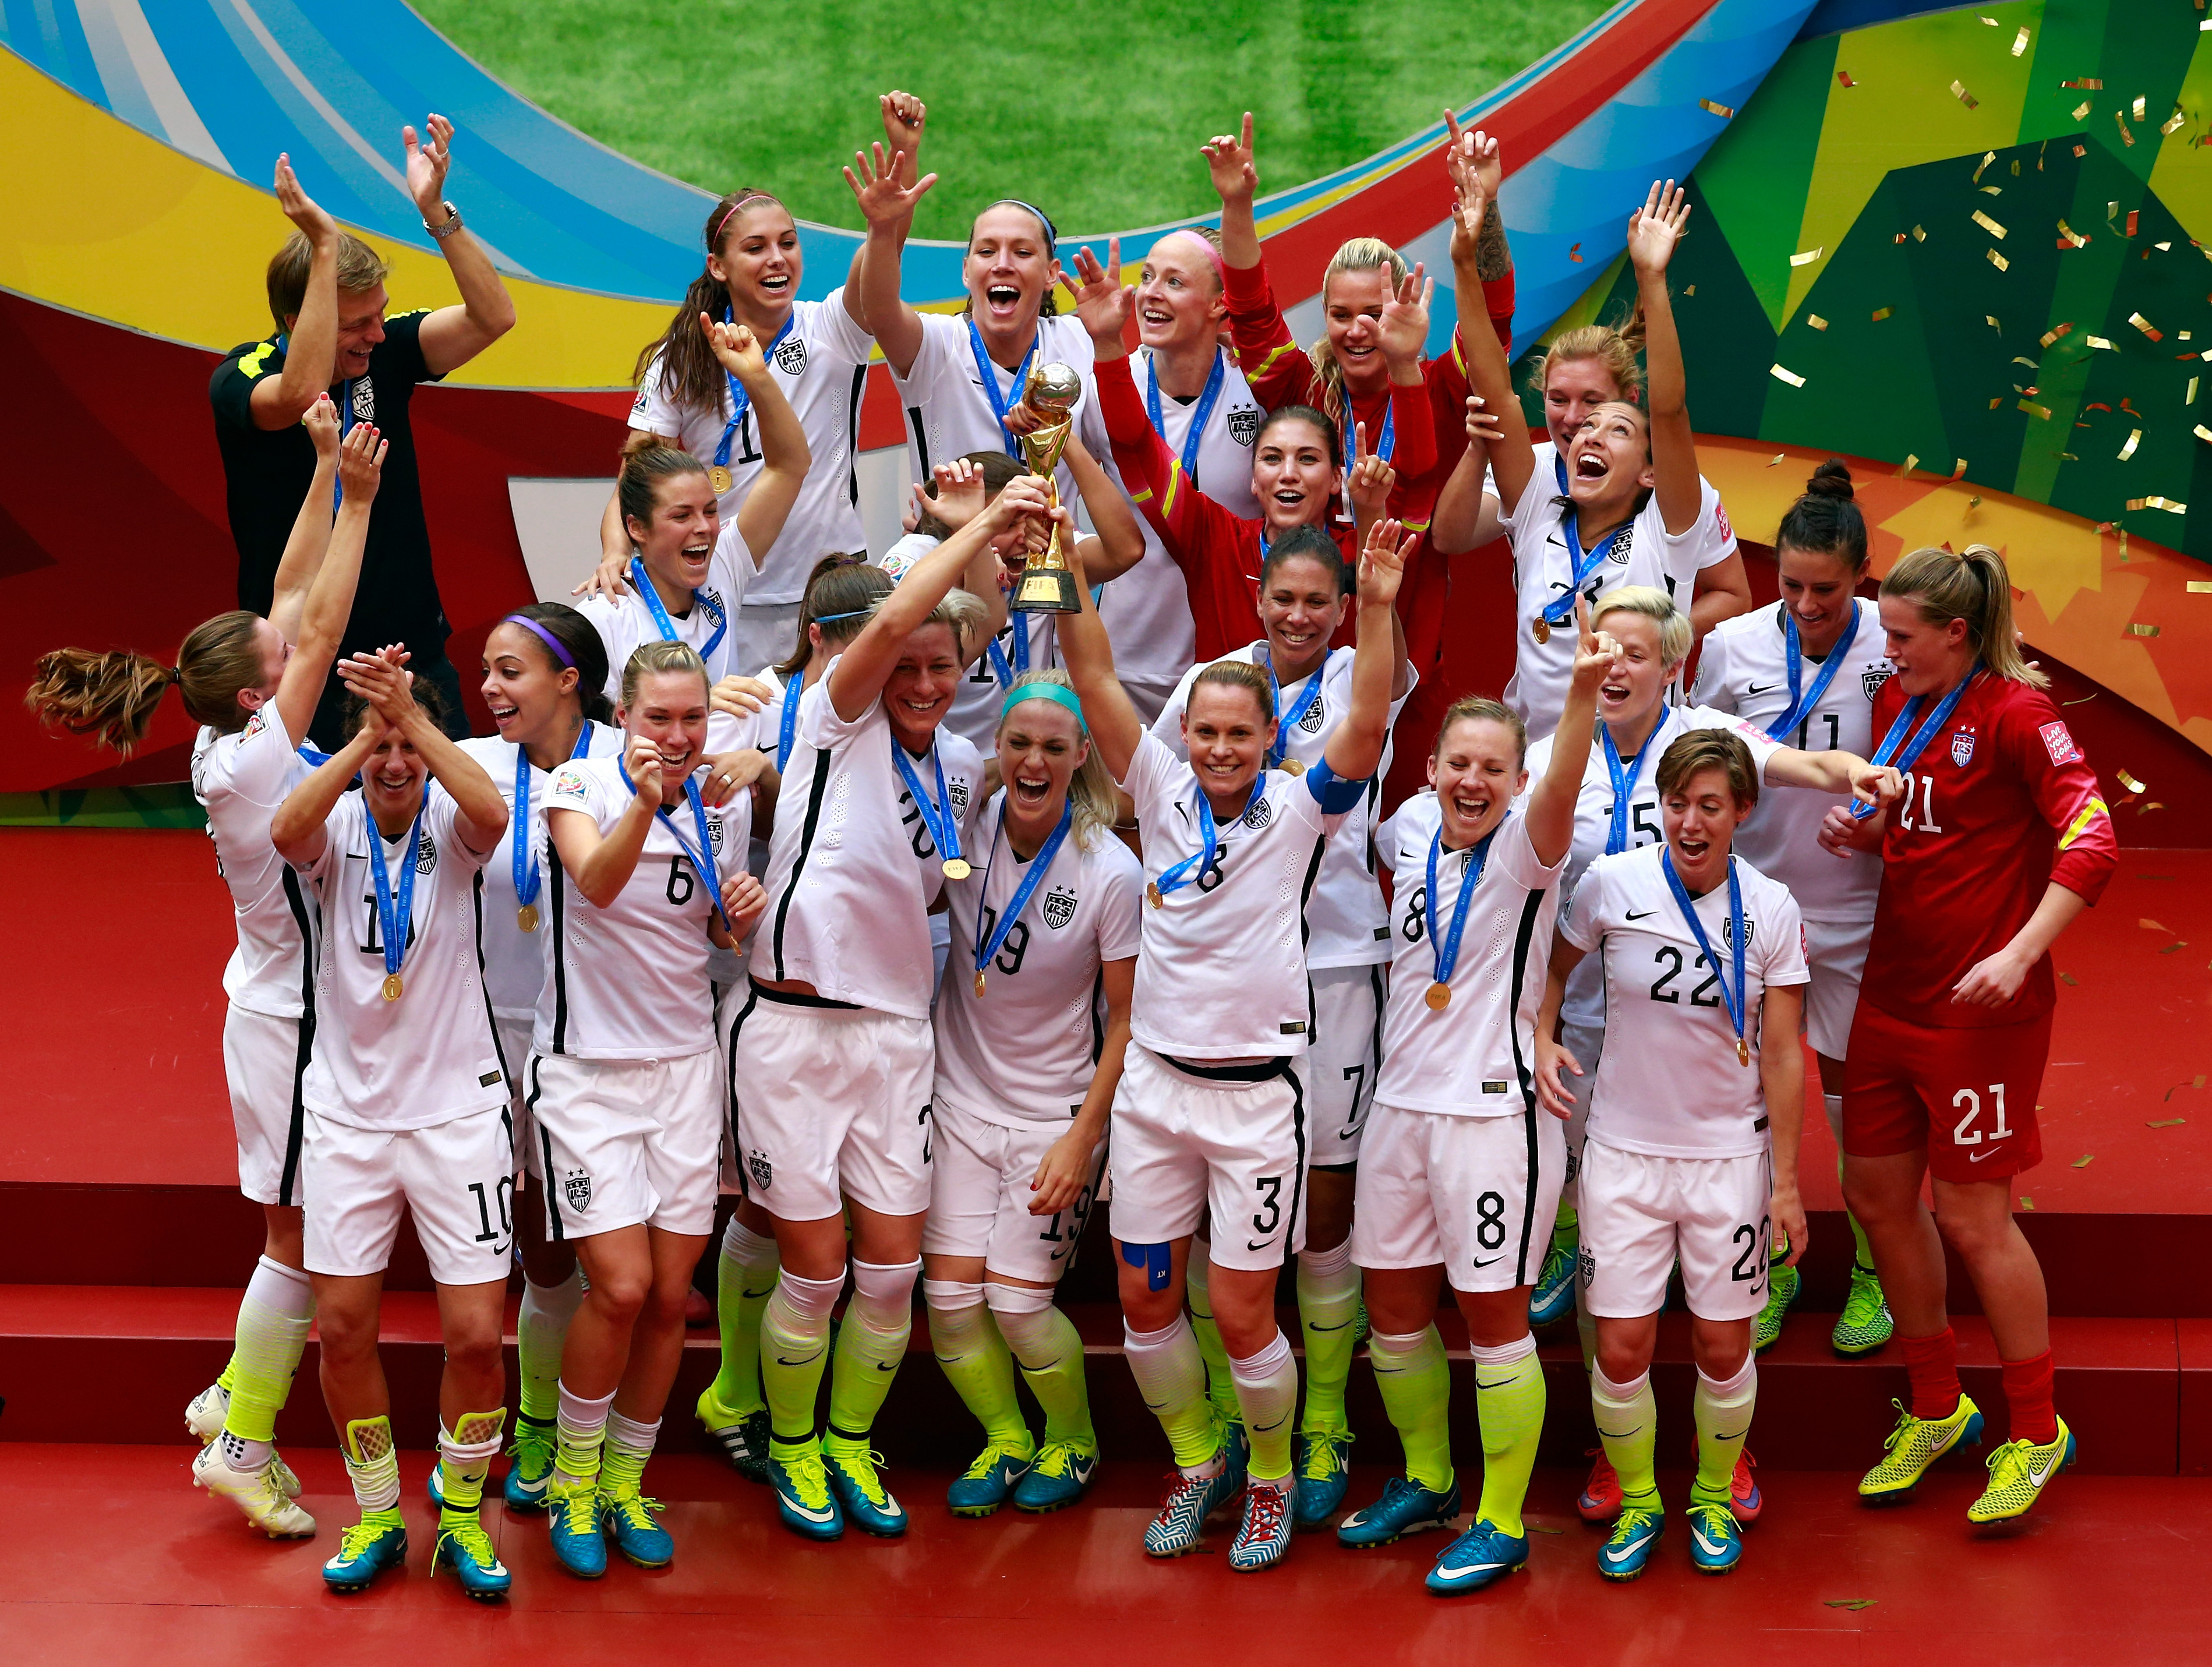 Well Played, USA Women's Soccer Team World Cup 2015 Champions Go Fug